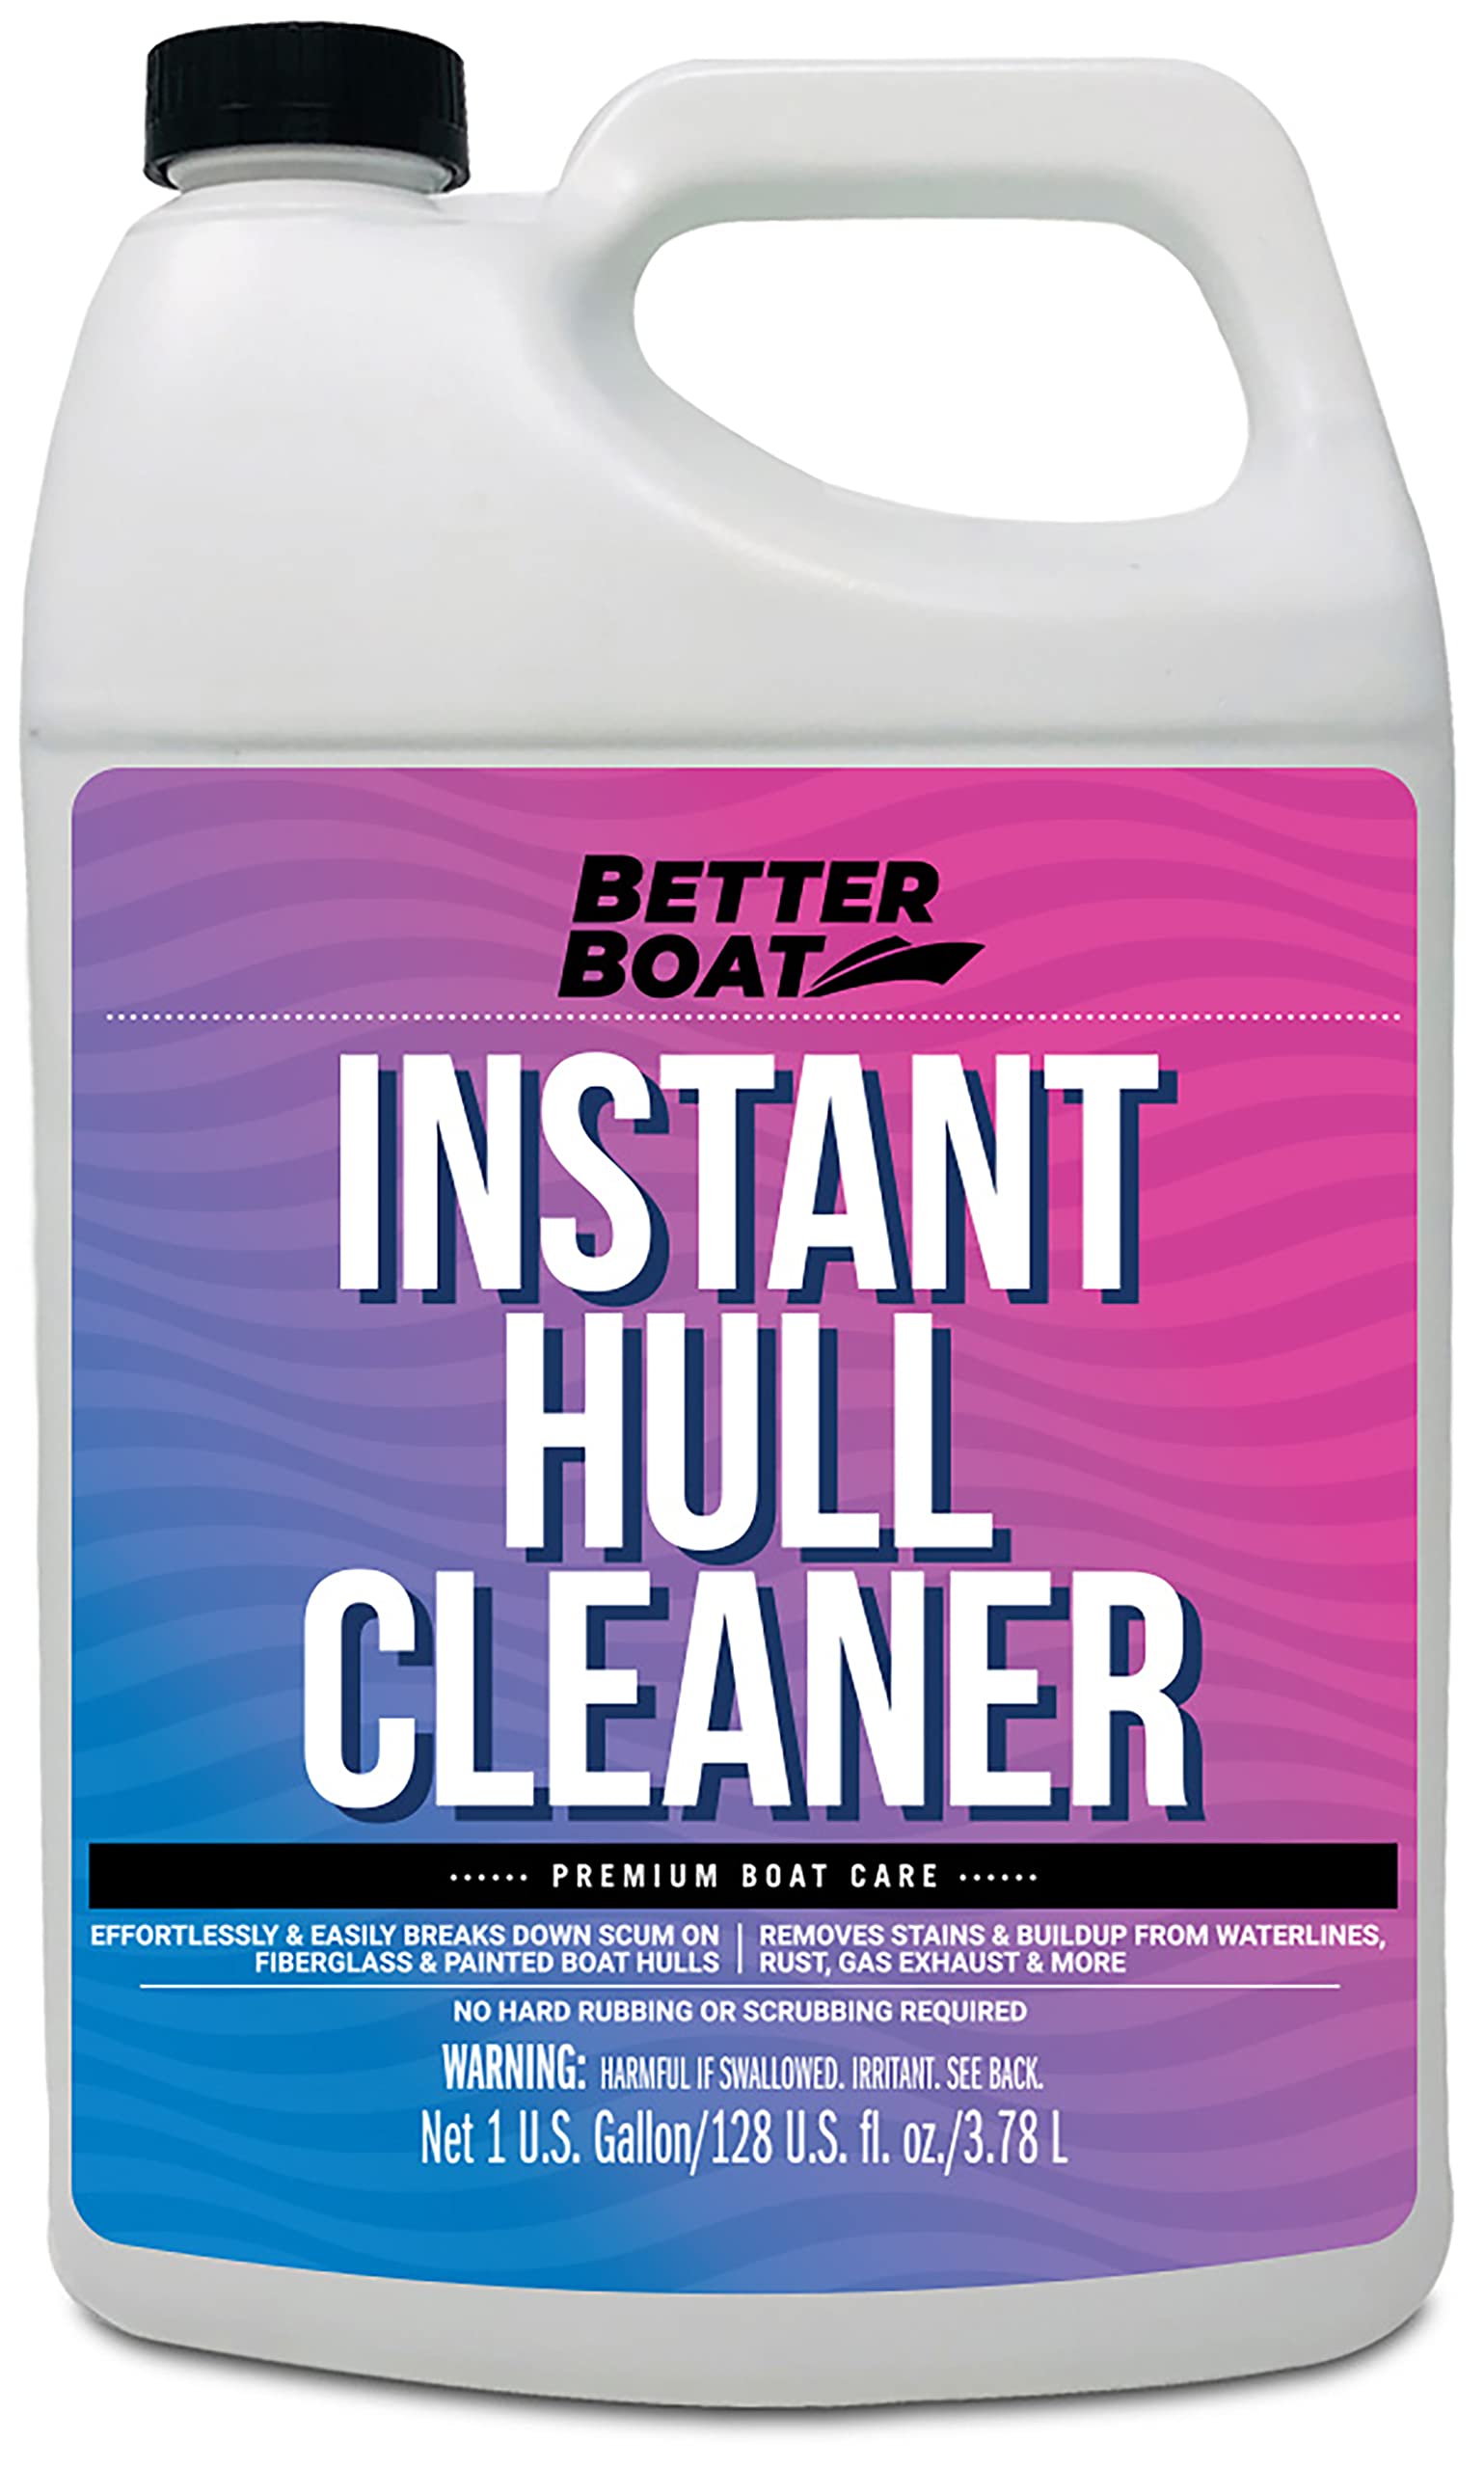 Fiberglass Boat Hull Cleaner for Boats & Aluminum Boat Cleaner Cleaning  Supplies Marine Metal Stain Remover and Restorer Boat Soap Wash Pro  Products Clean Deck Pontoon & Sailboat & Boat Deck Cleaner